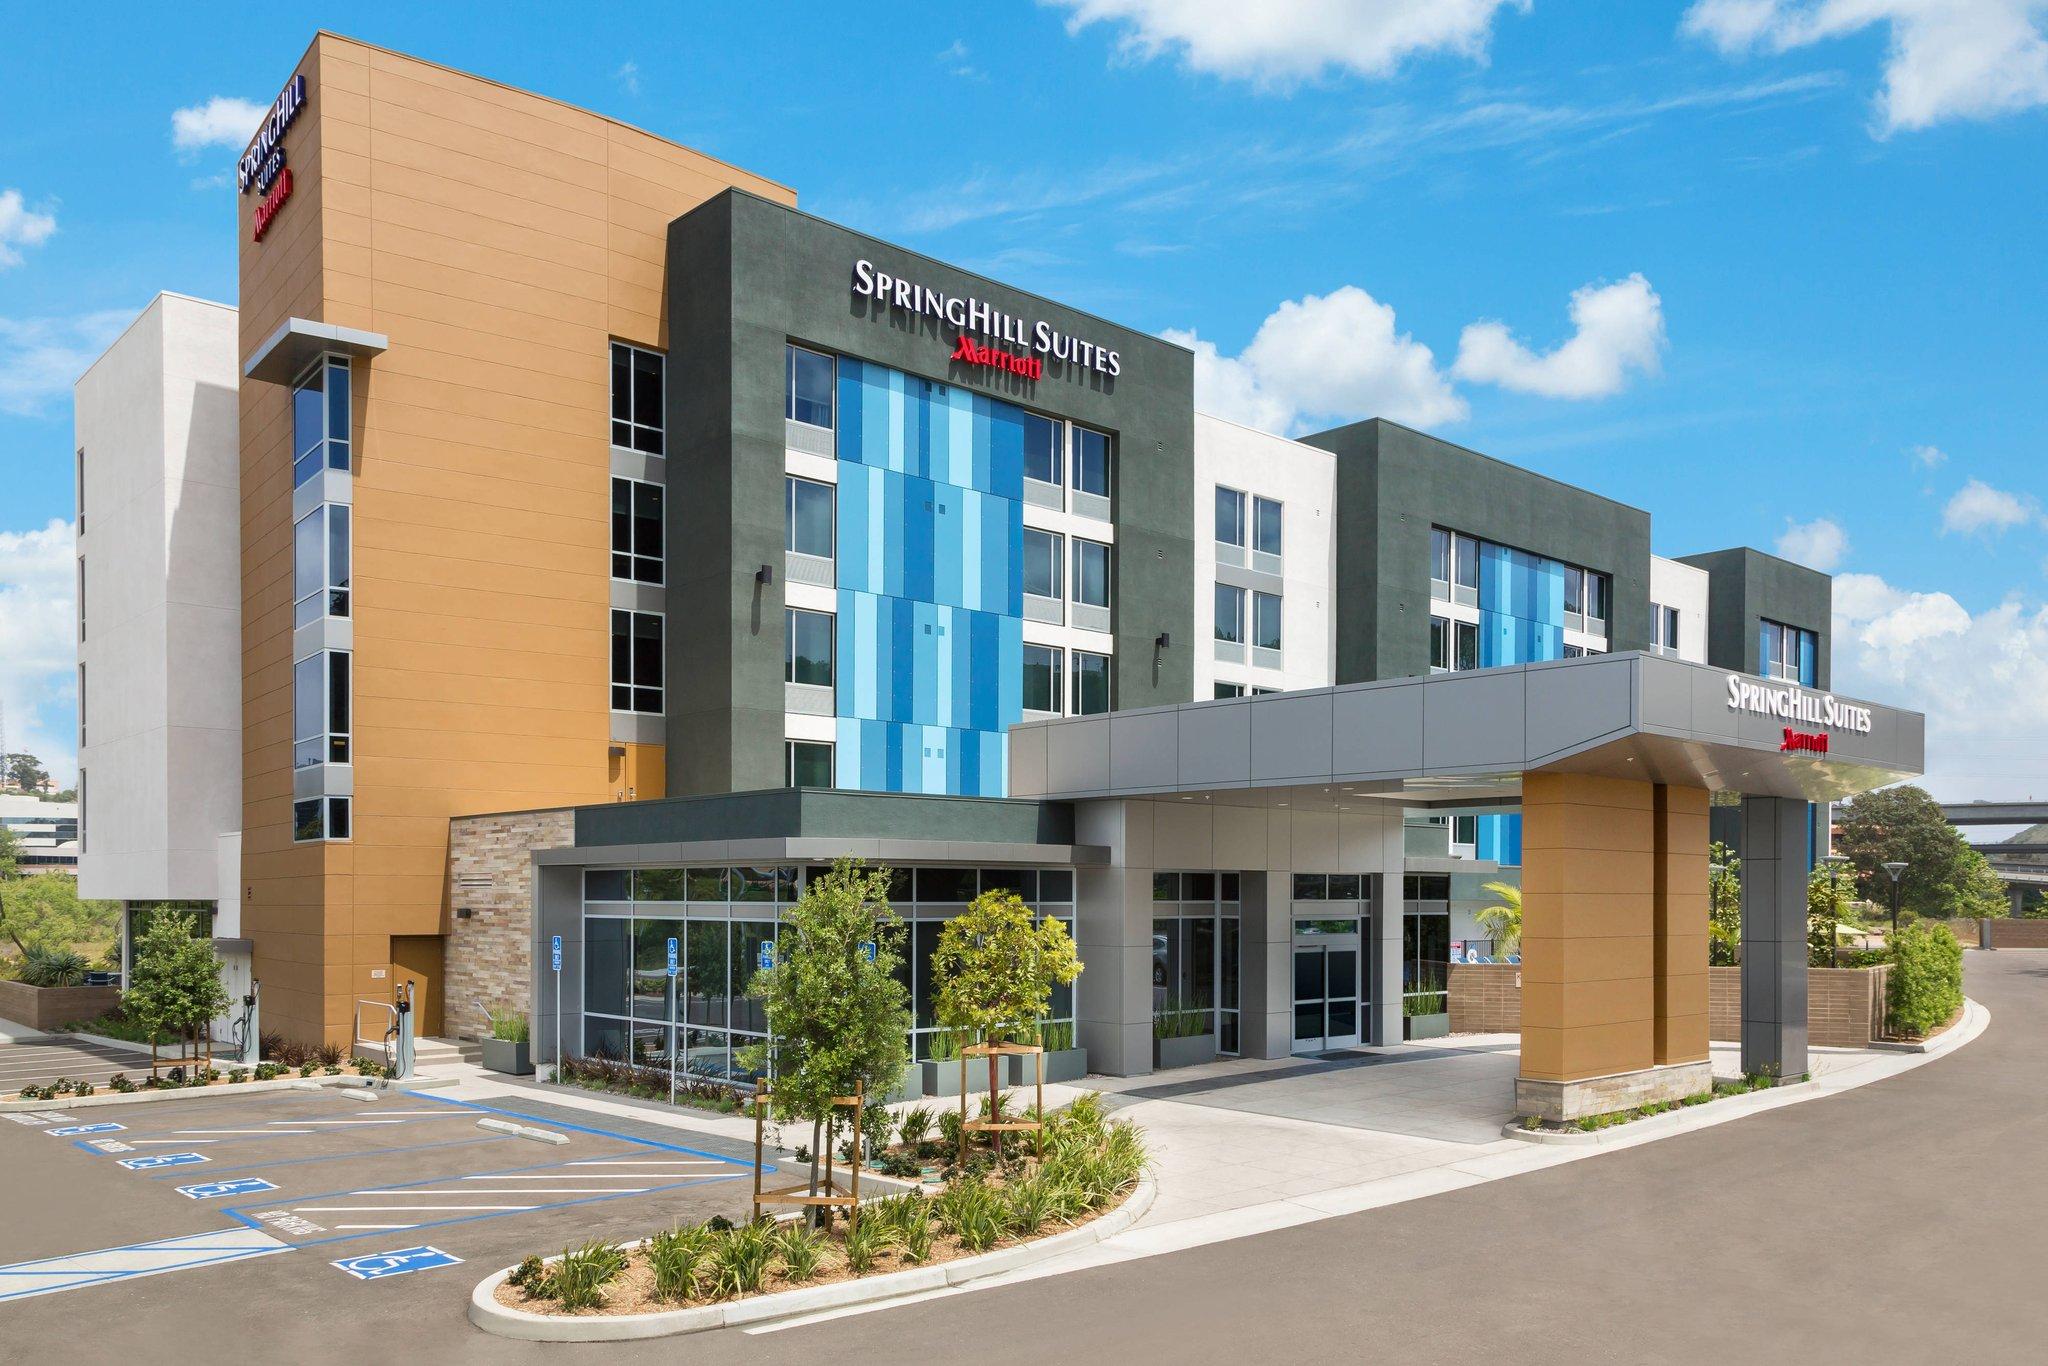 SpringHill Suites San Diego Mission Valley in San Diego, CA